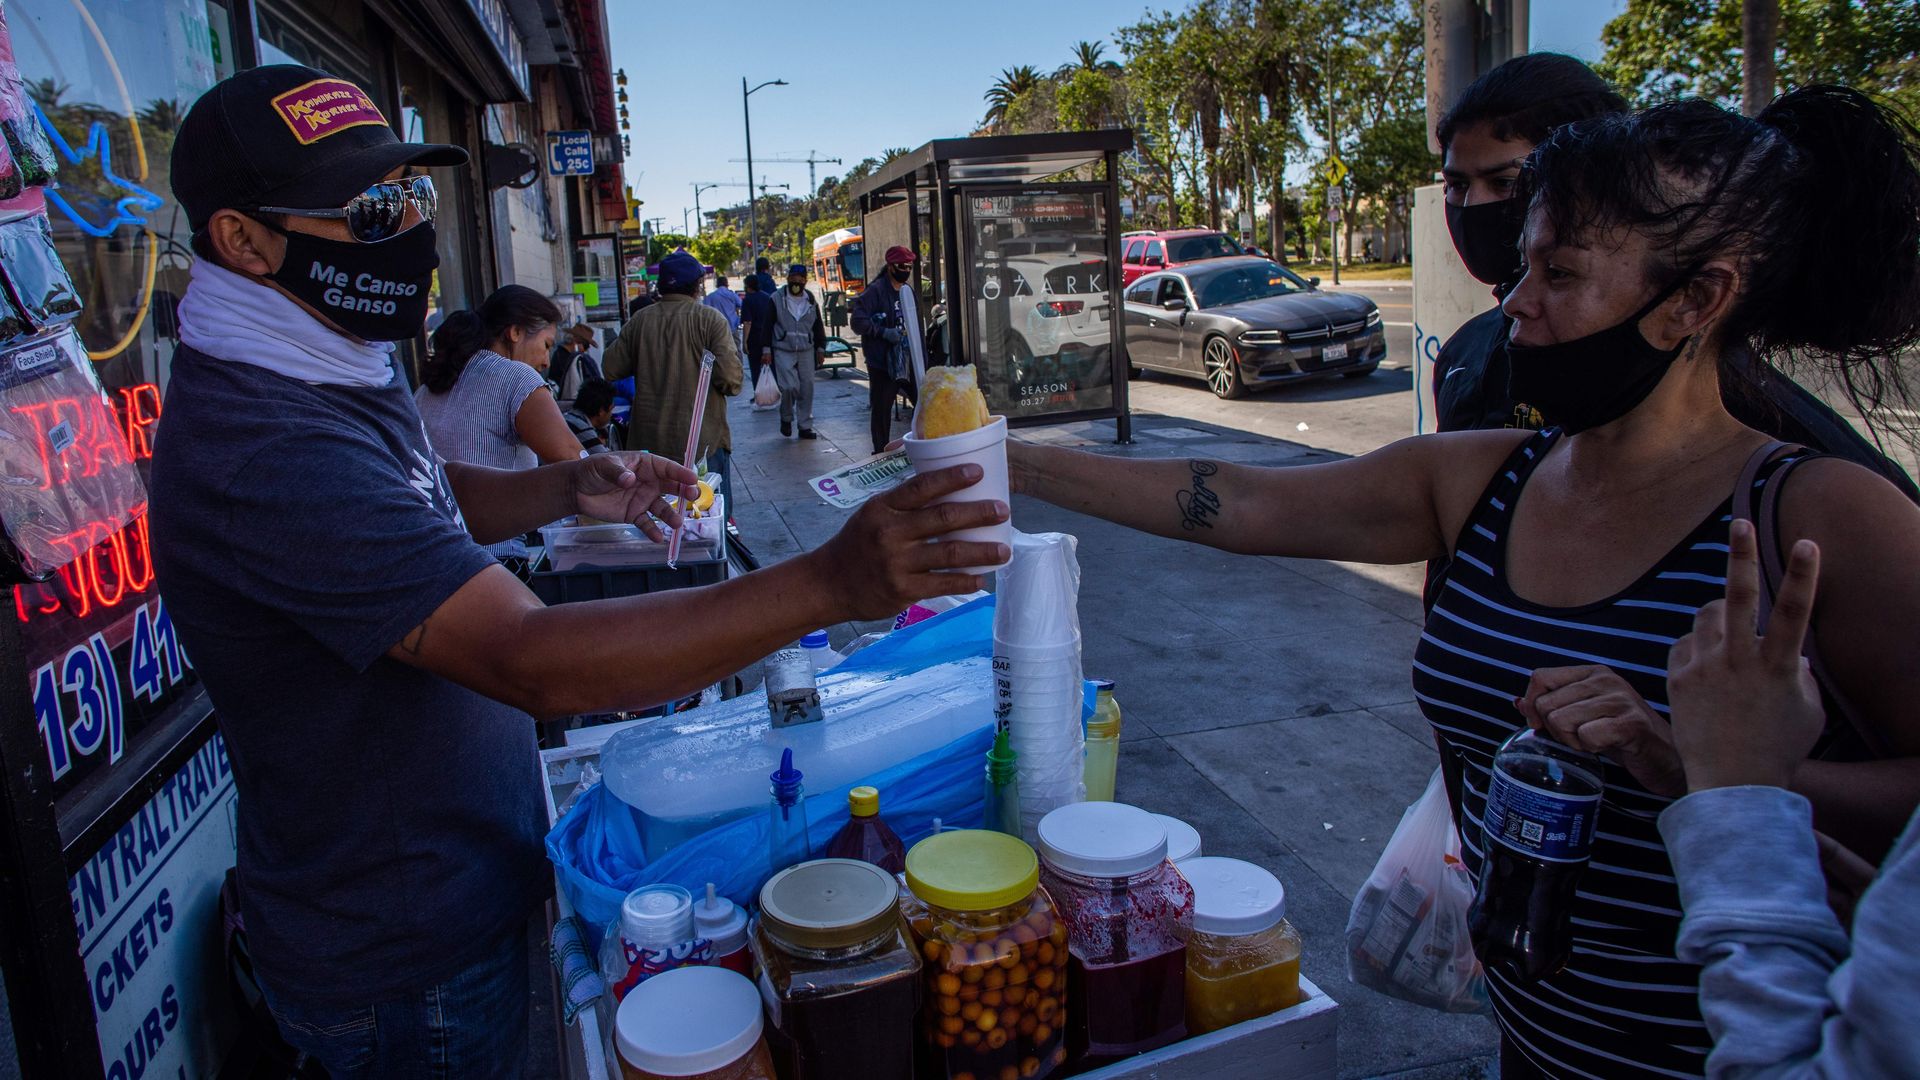 In this image, a woman buys ice cream from a street vendor